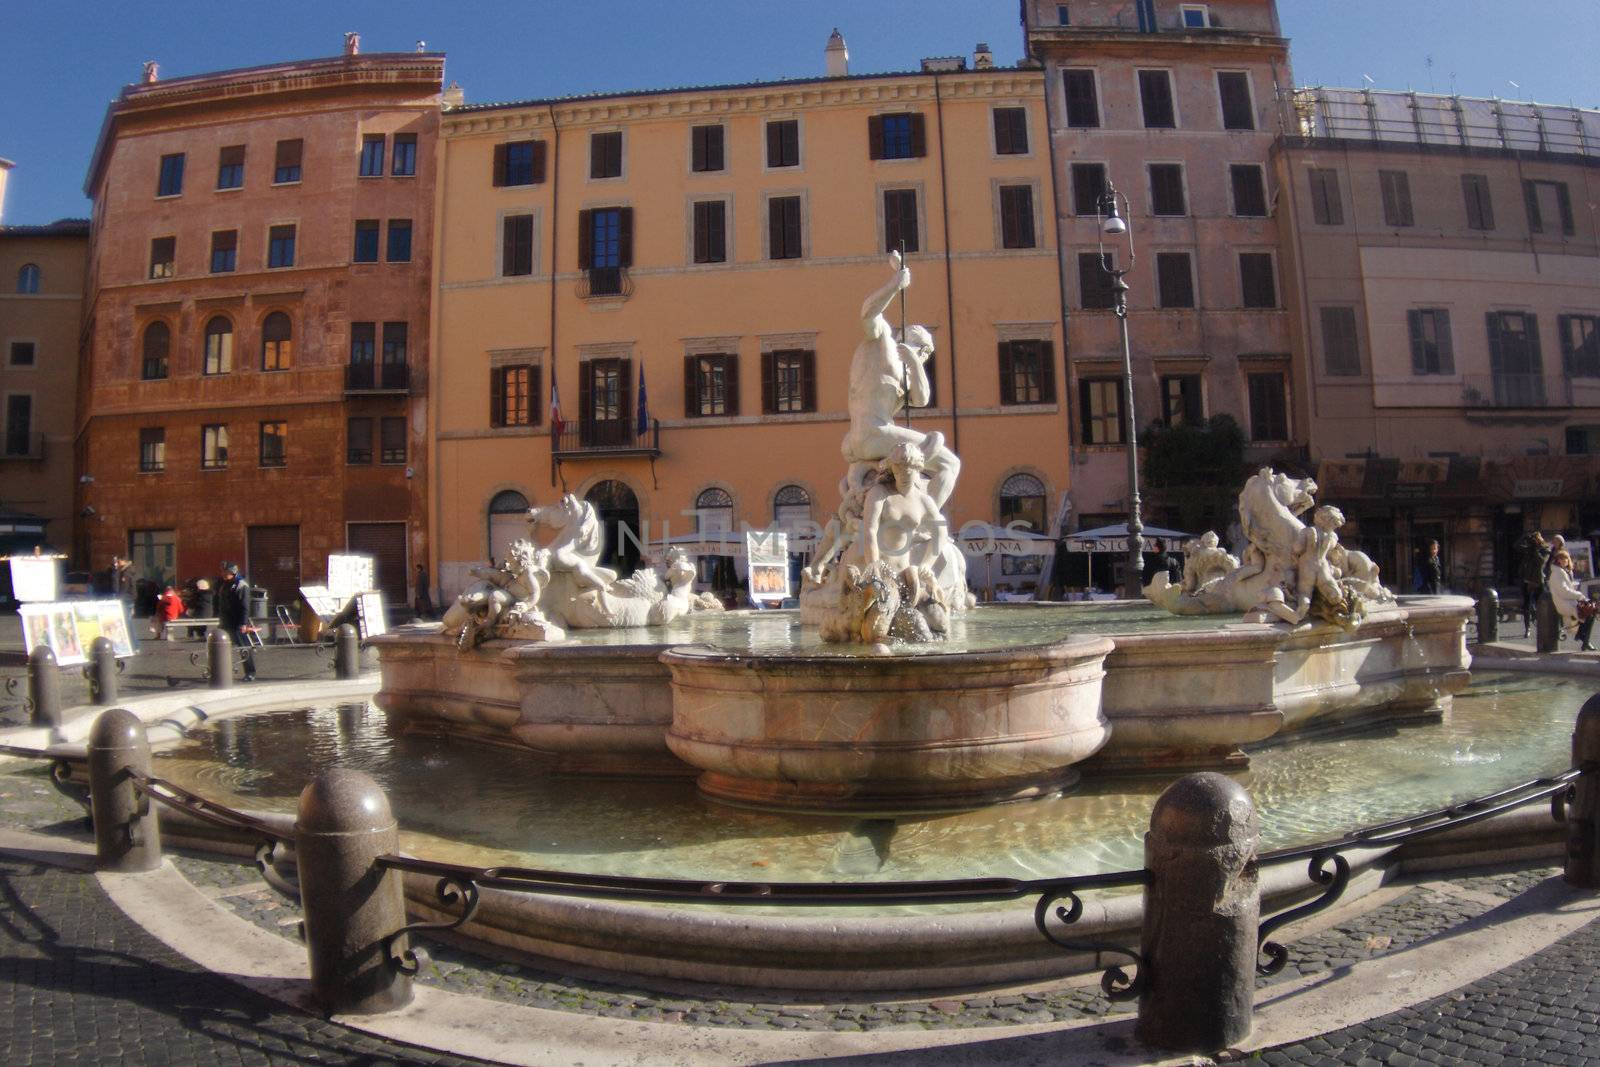 Rome, fountain of four rivers, Architecture, Art, Attraction, Capital, City, Culture, Europe, Famous, Fountain, Historic, History, Italian, Italy, Landmark, Marble, Monument, Obelisk, Sculpture, Square, Statue, Street, Tourism, Tourist, Travel,